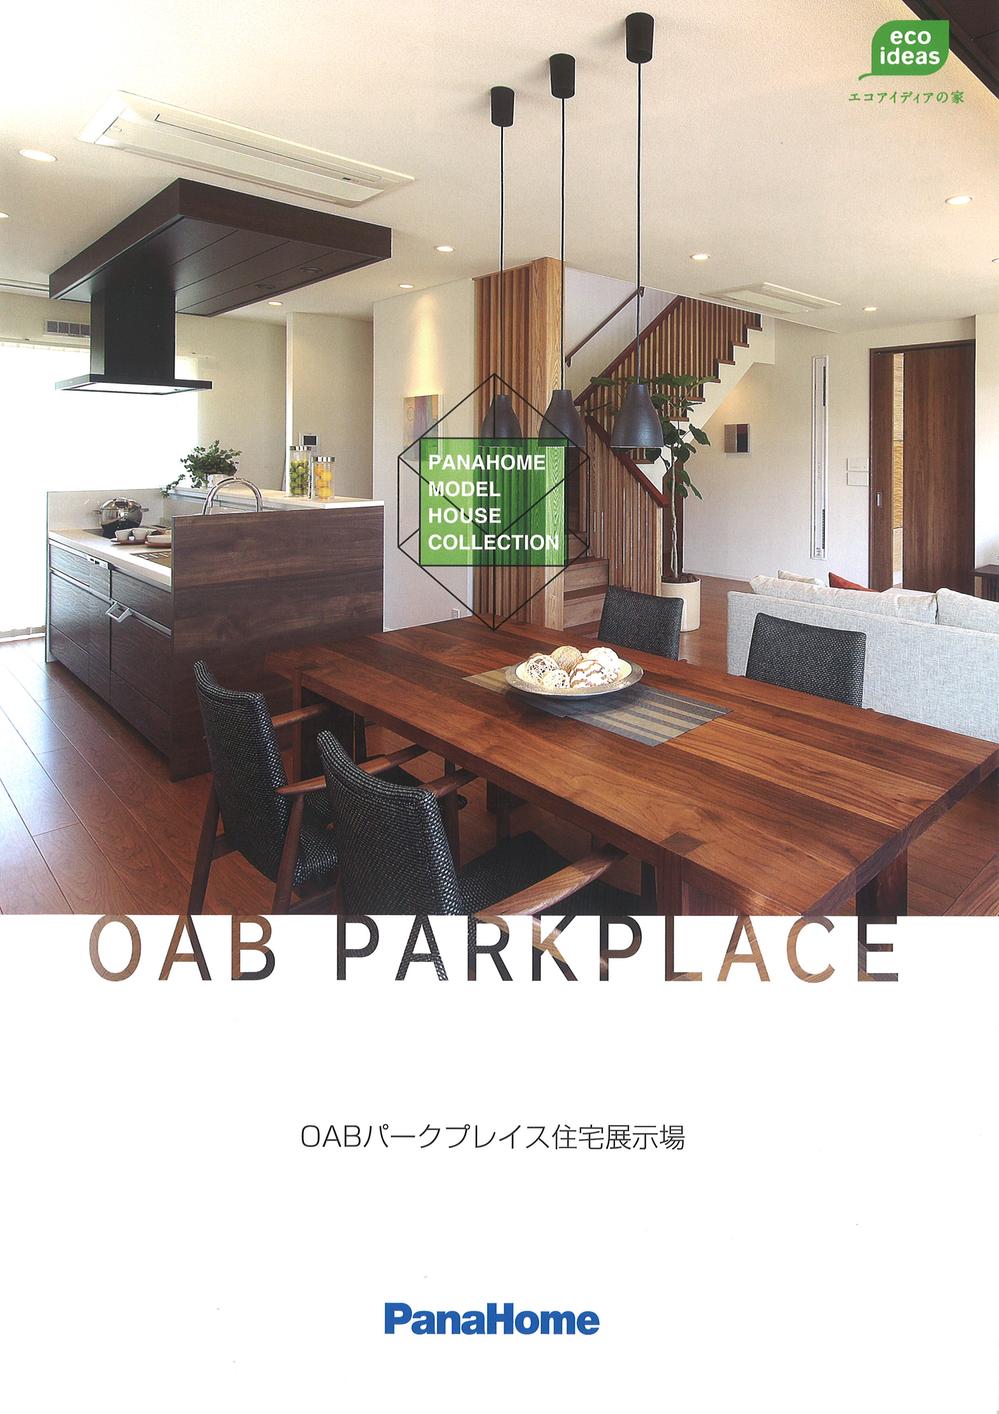 Other. OAB Park Place housing exhibition hall